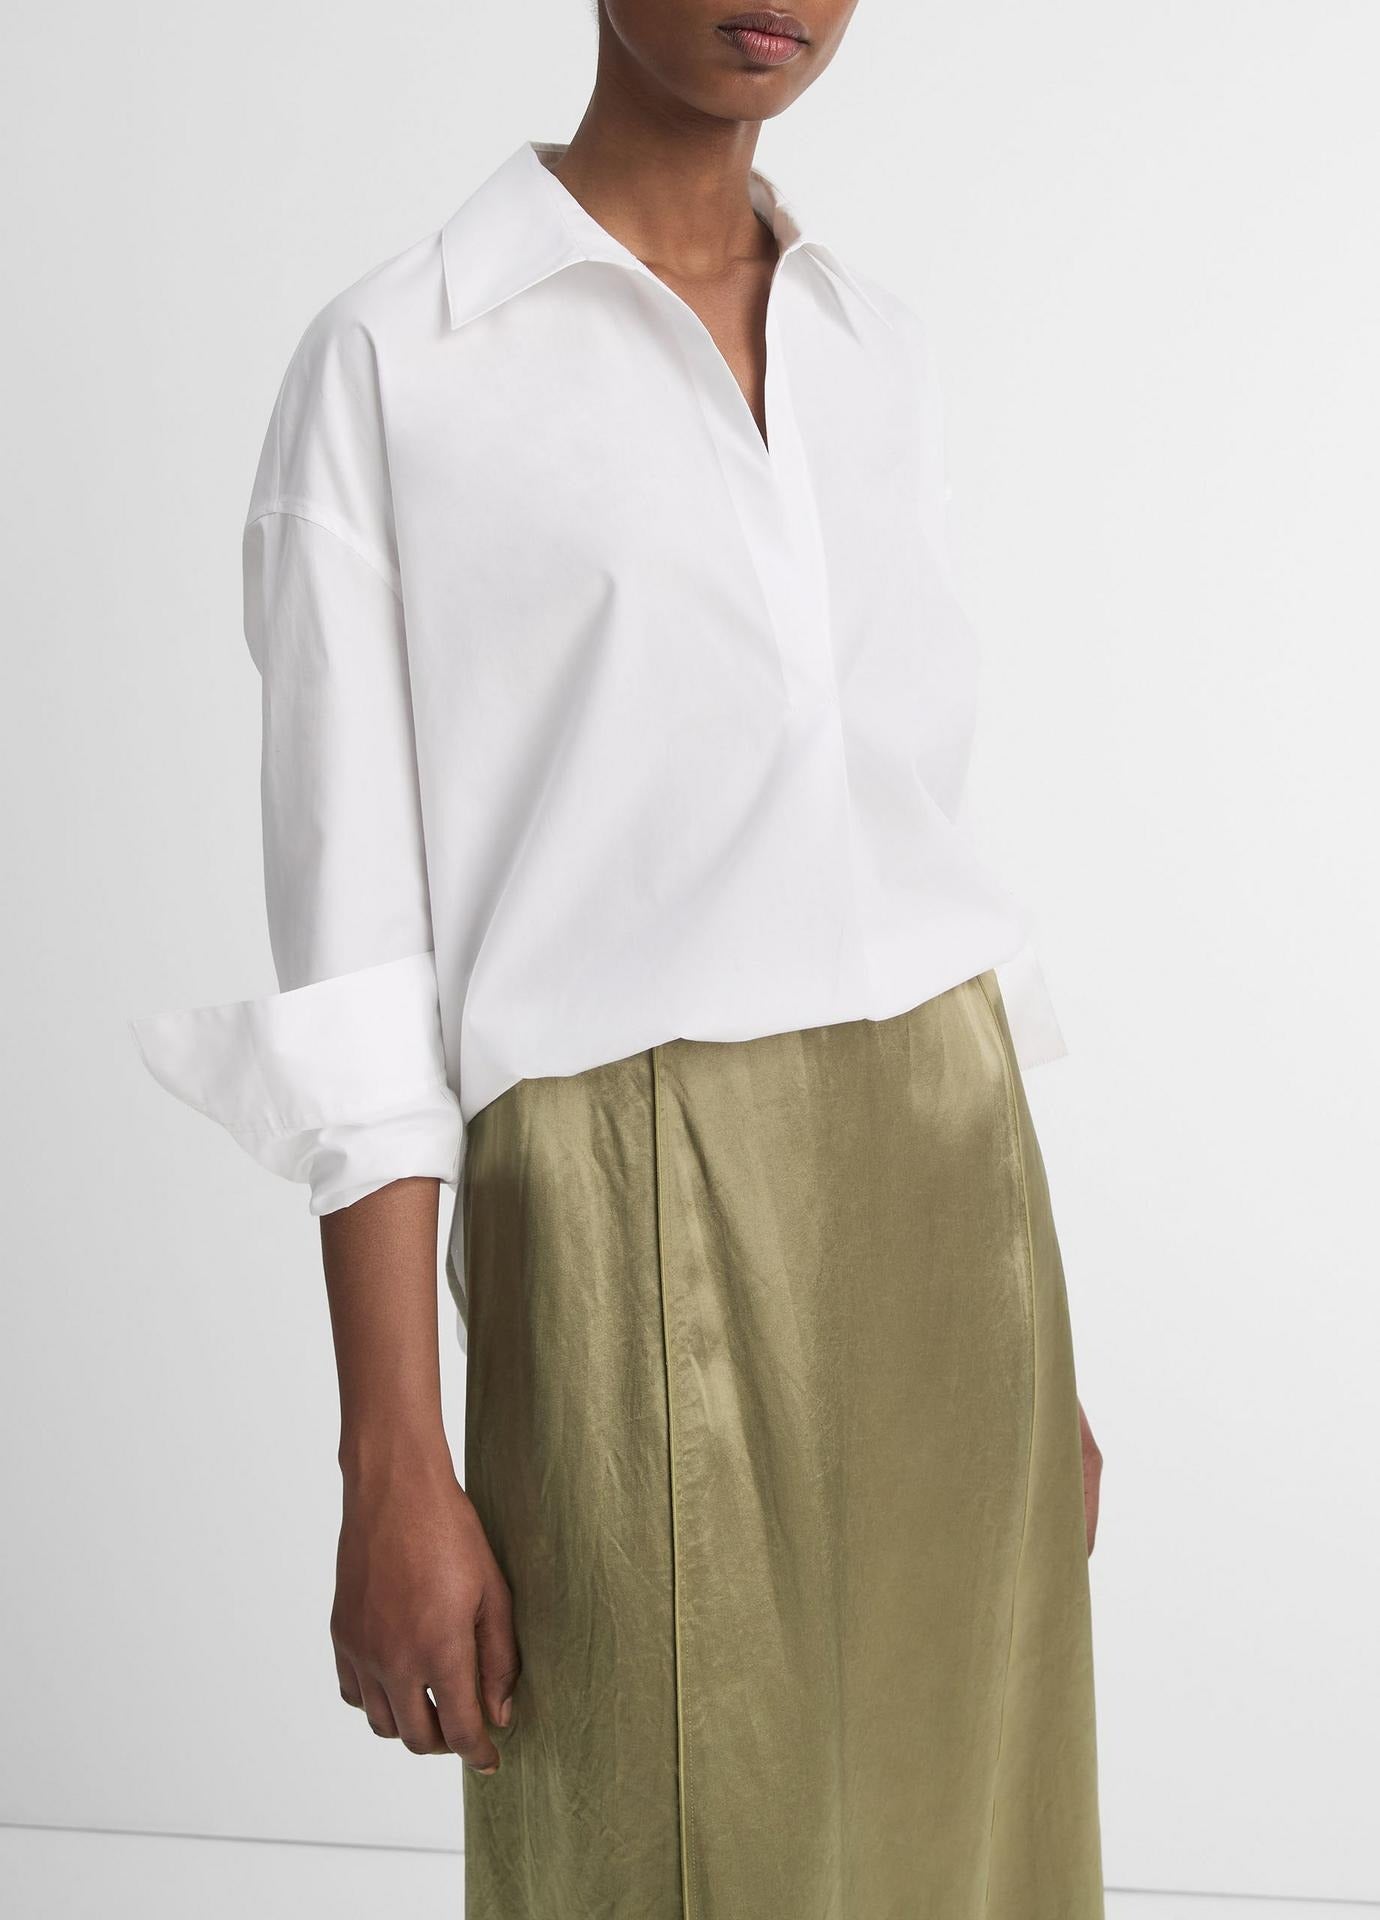 Vince Cotton Half-Placket Shirt in Optic White